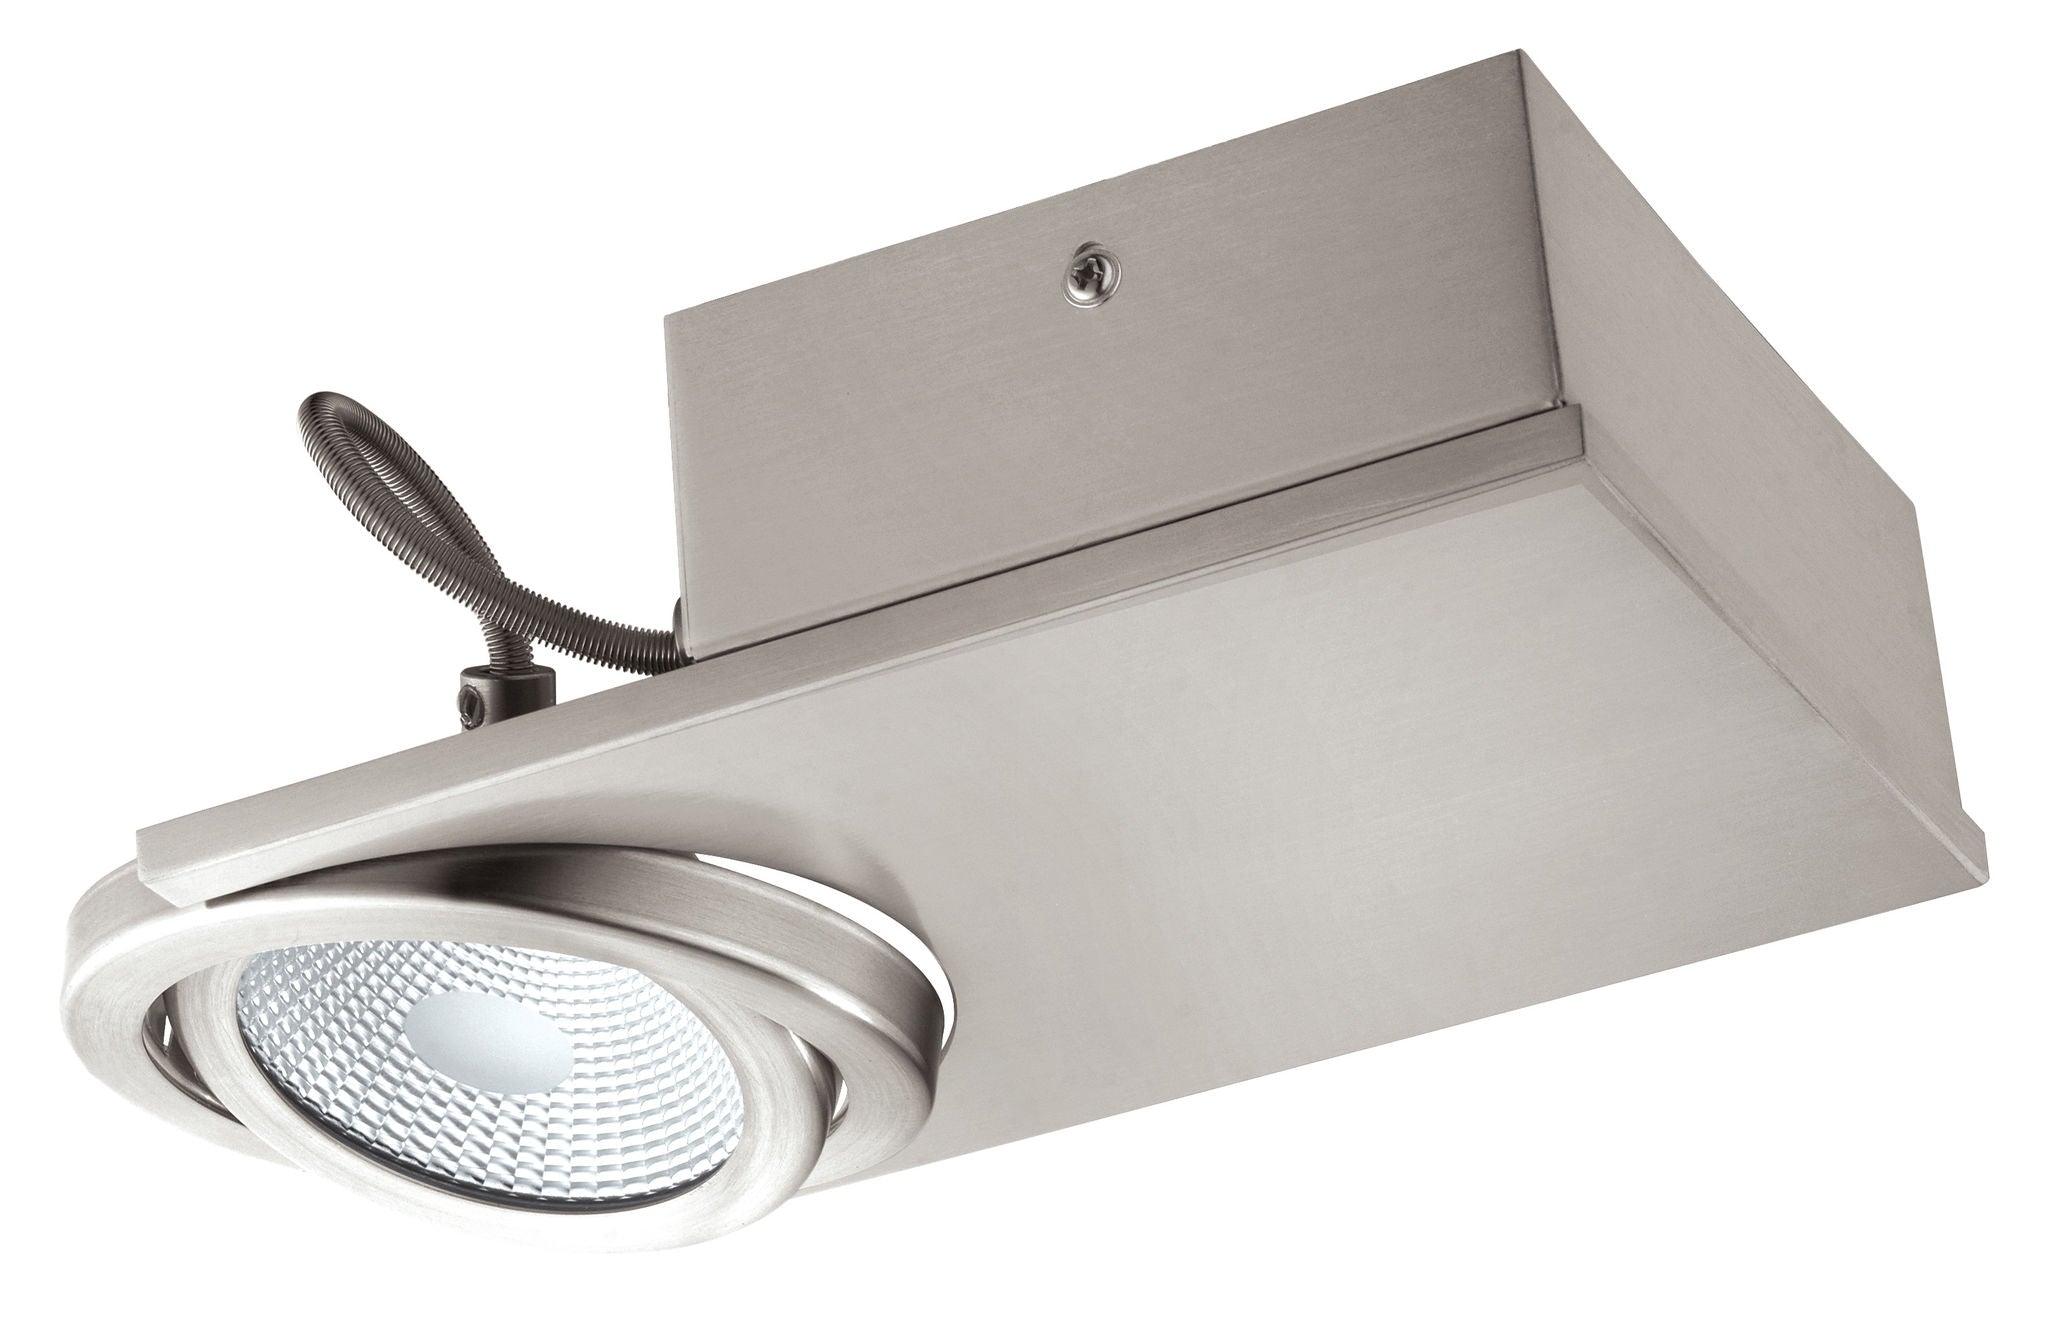 Brea Spotlight Stainless steel INTEGRATED LED - 39247A | EGLO